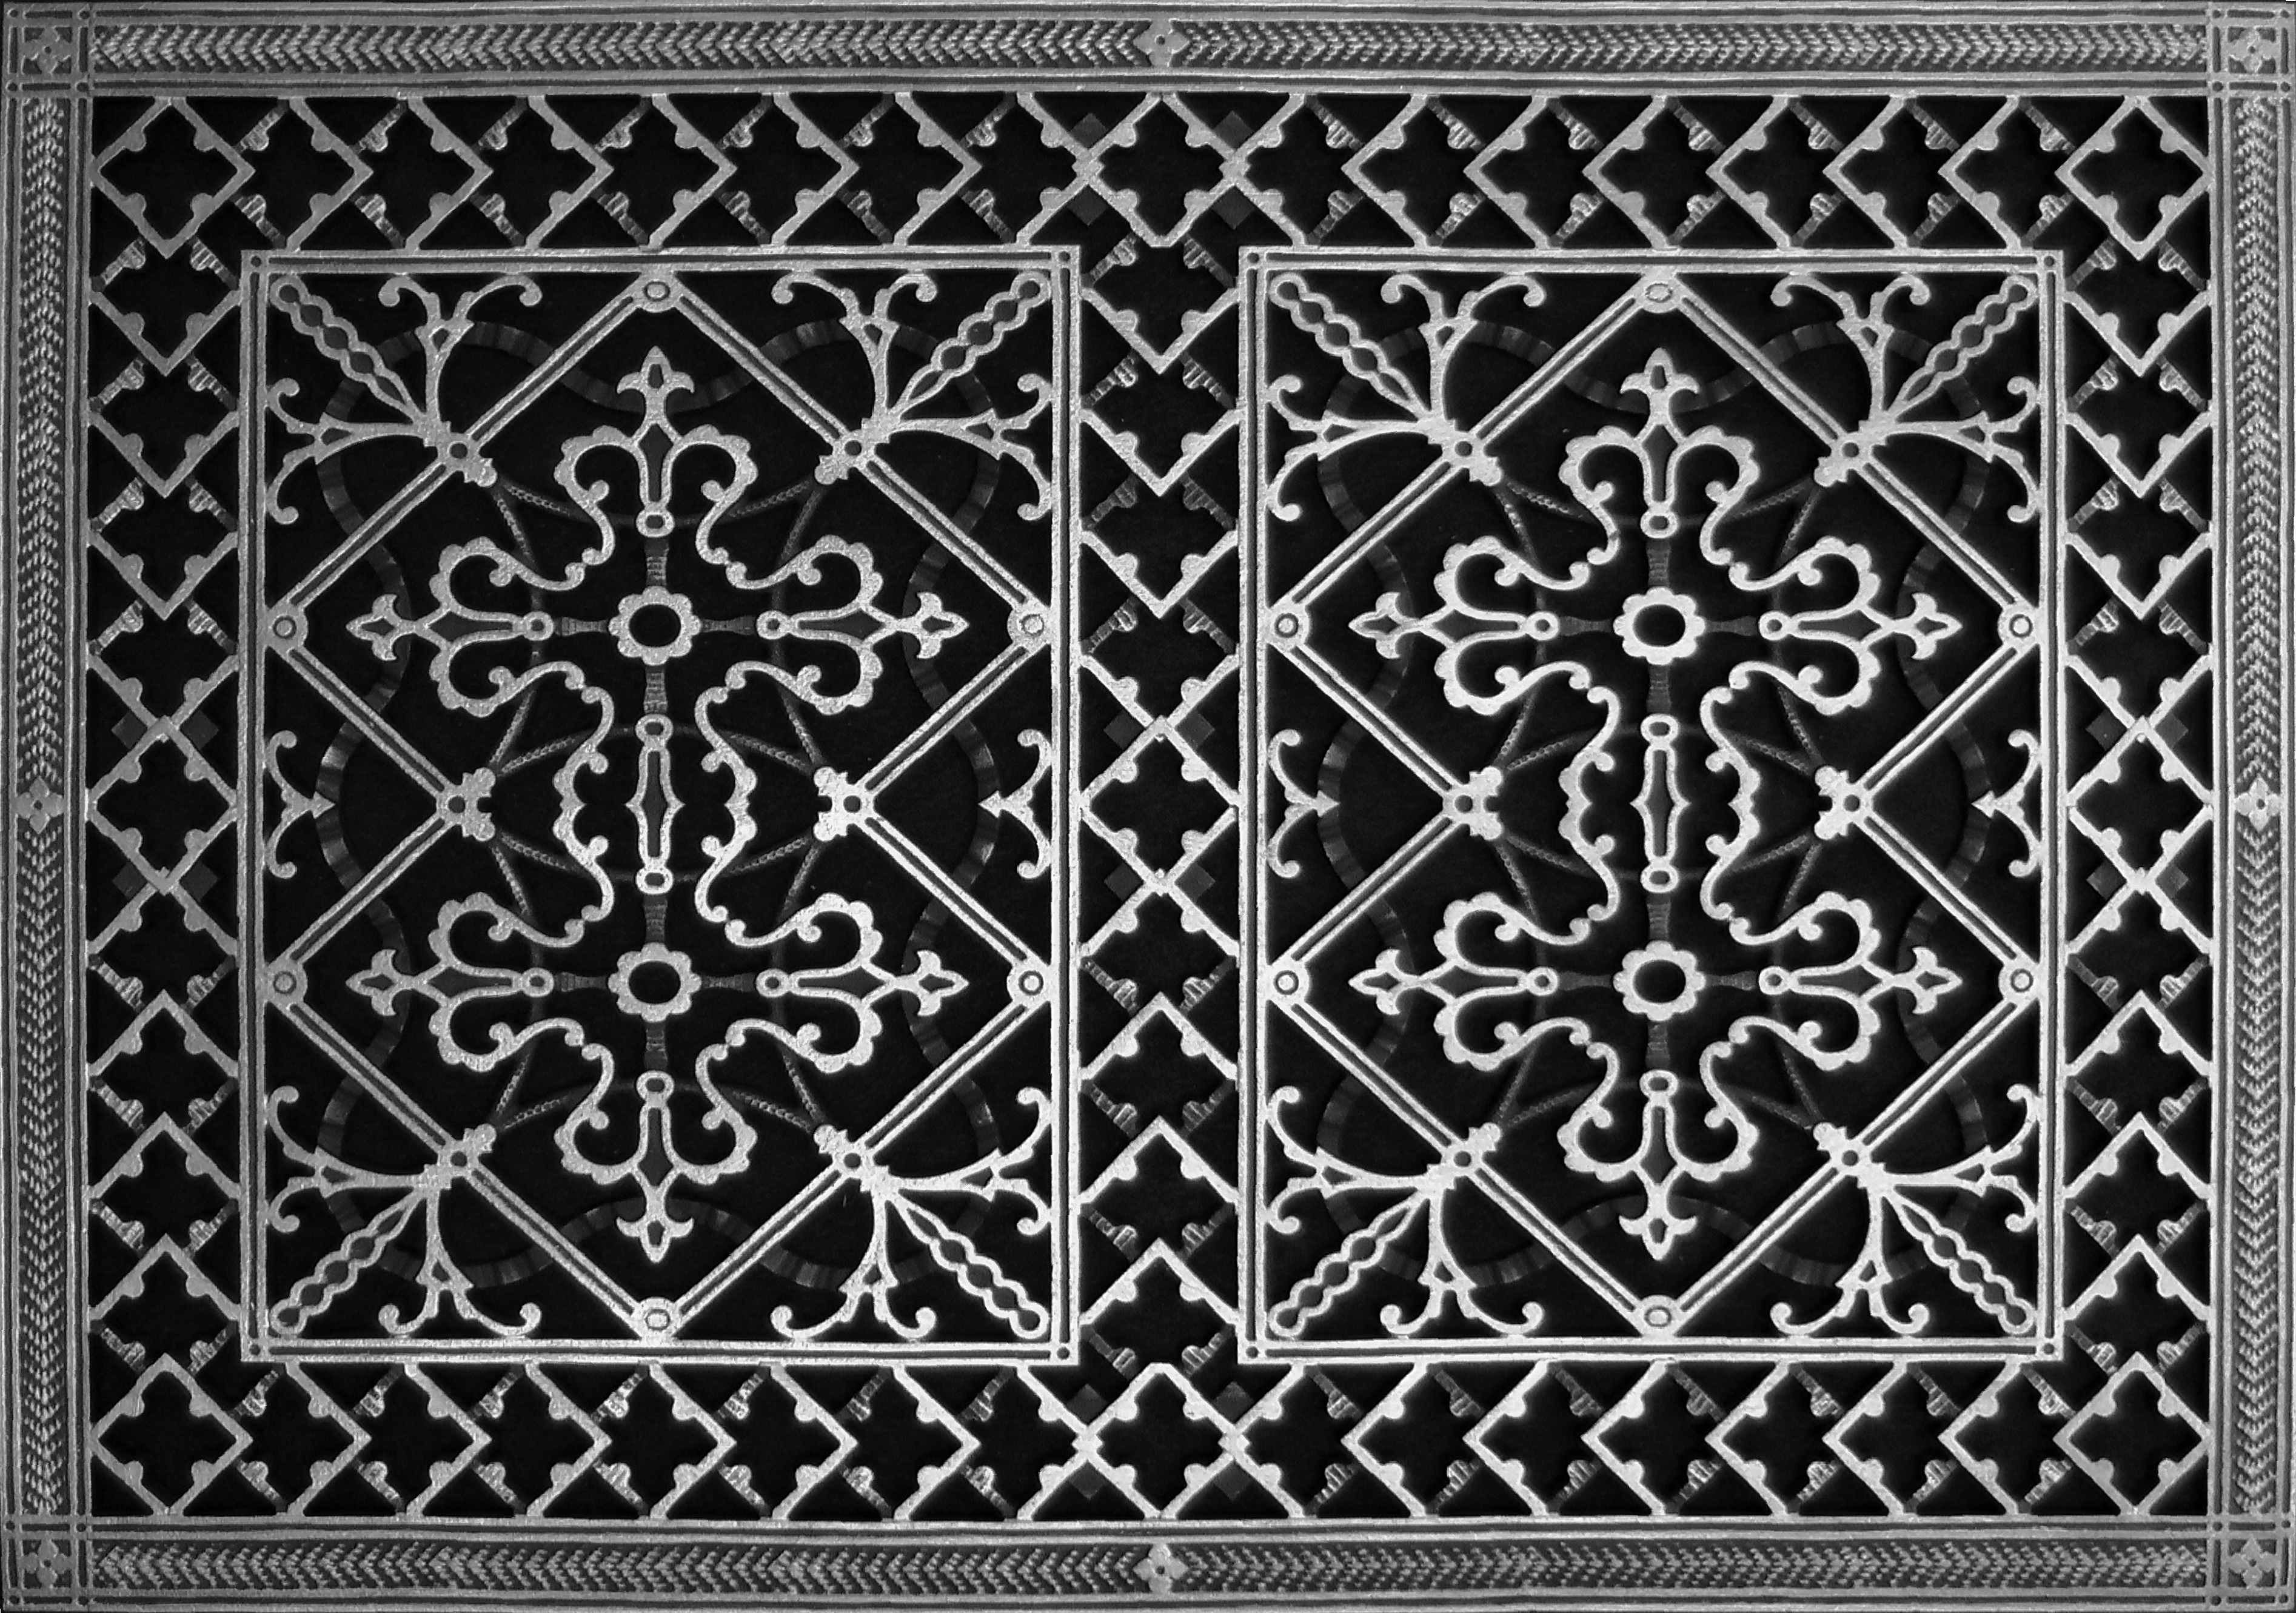 Decorative vent cover 20x30 in arts and crafts style in pewter finish.